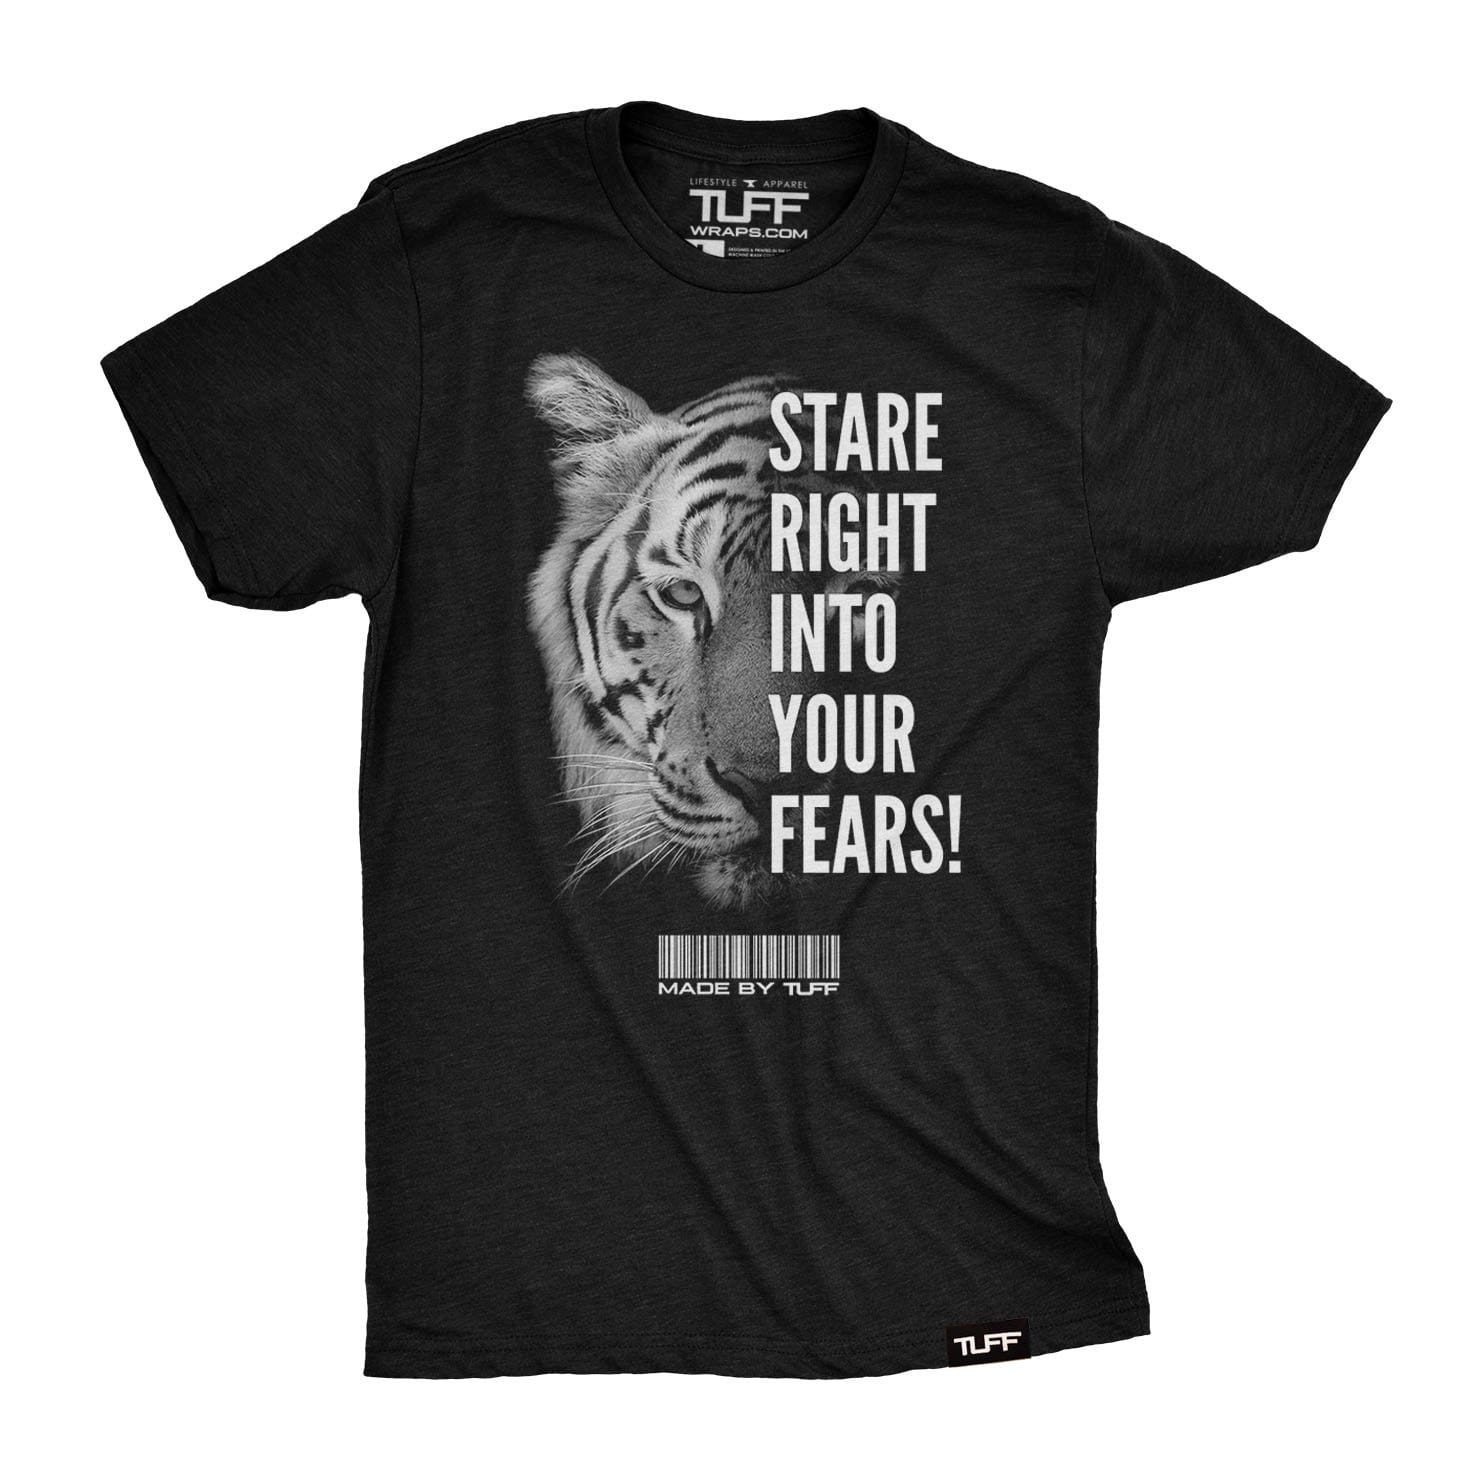 Stare Into Your Fears Tee T-shirt